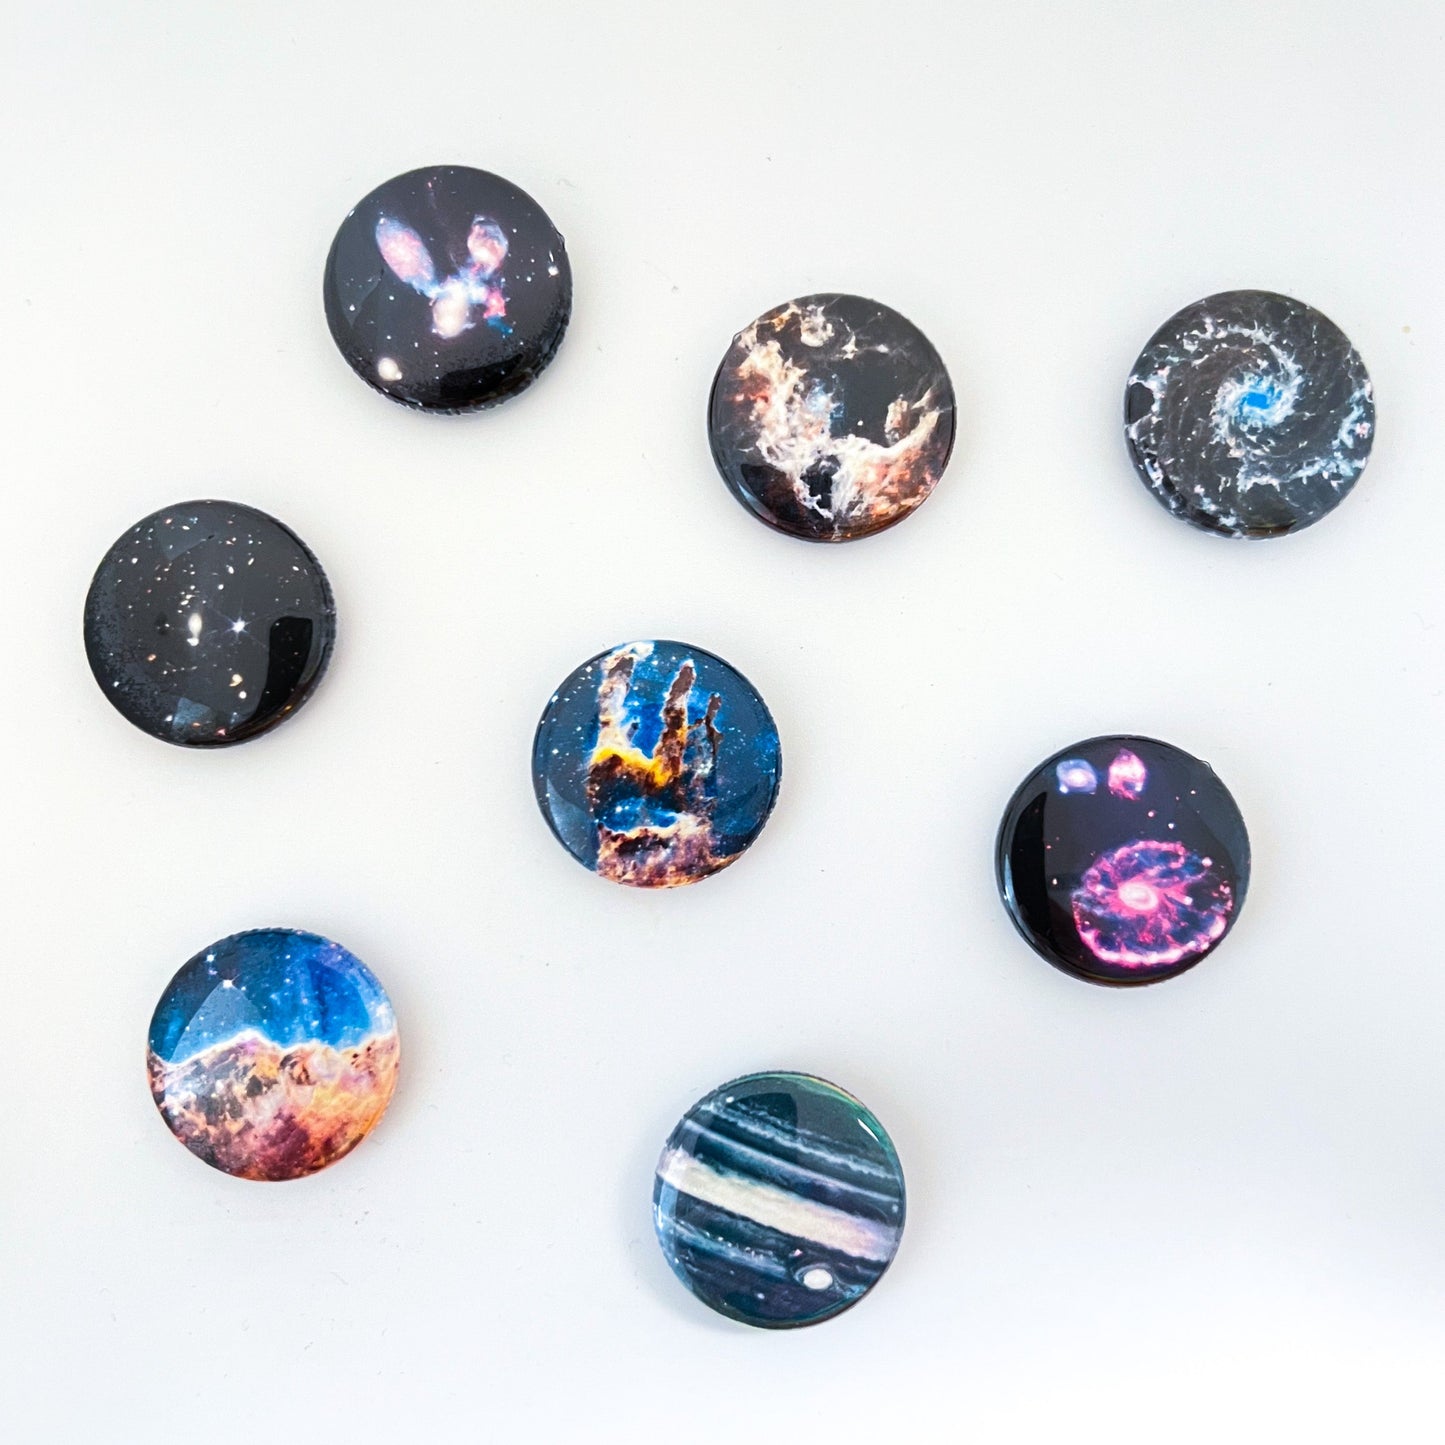 JWST Images for Interchangeable Jewelry - Magnets Only! – Yugen Handmade